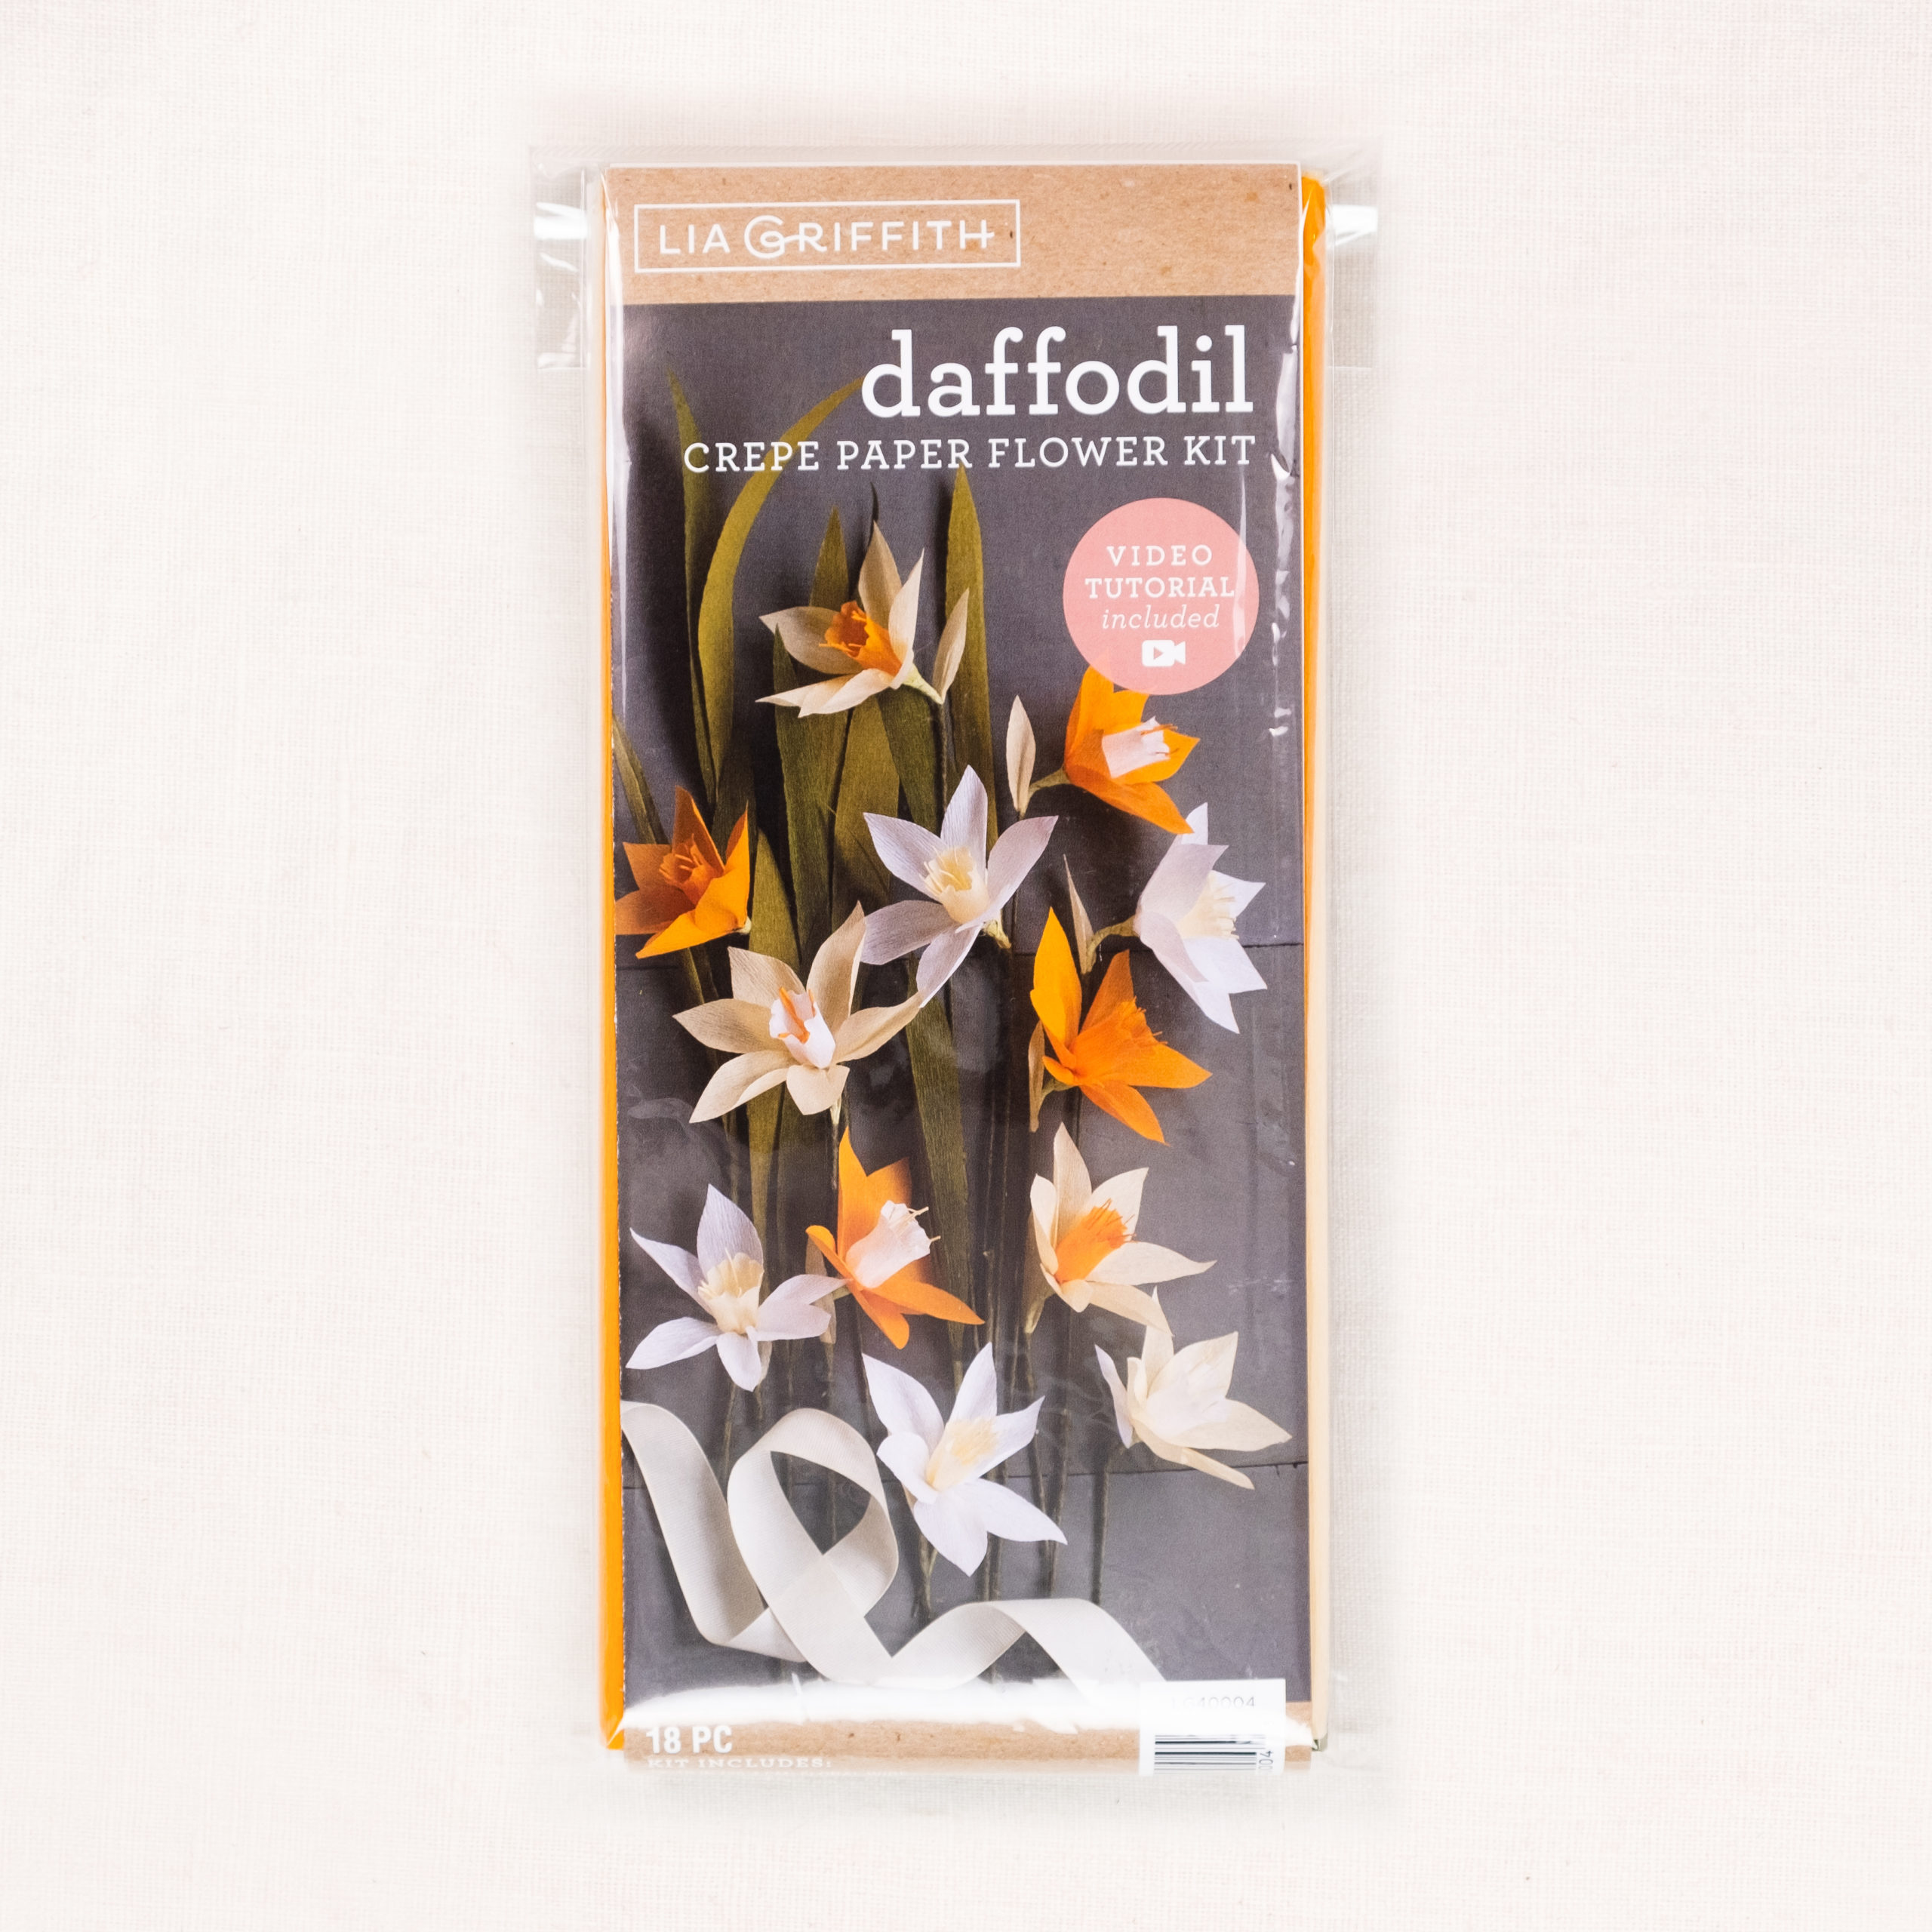 Paper Daffodils: Crepe Paper Flower Kit by Lia Griffith